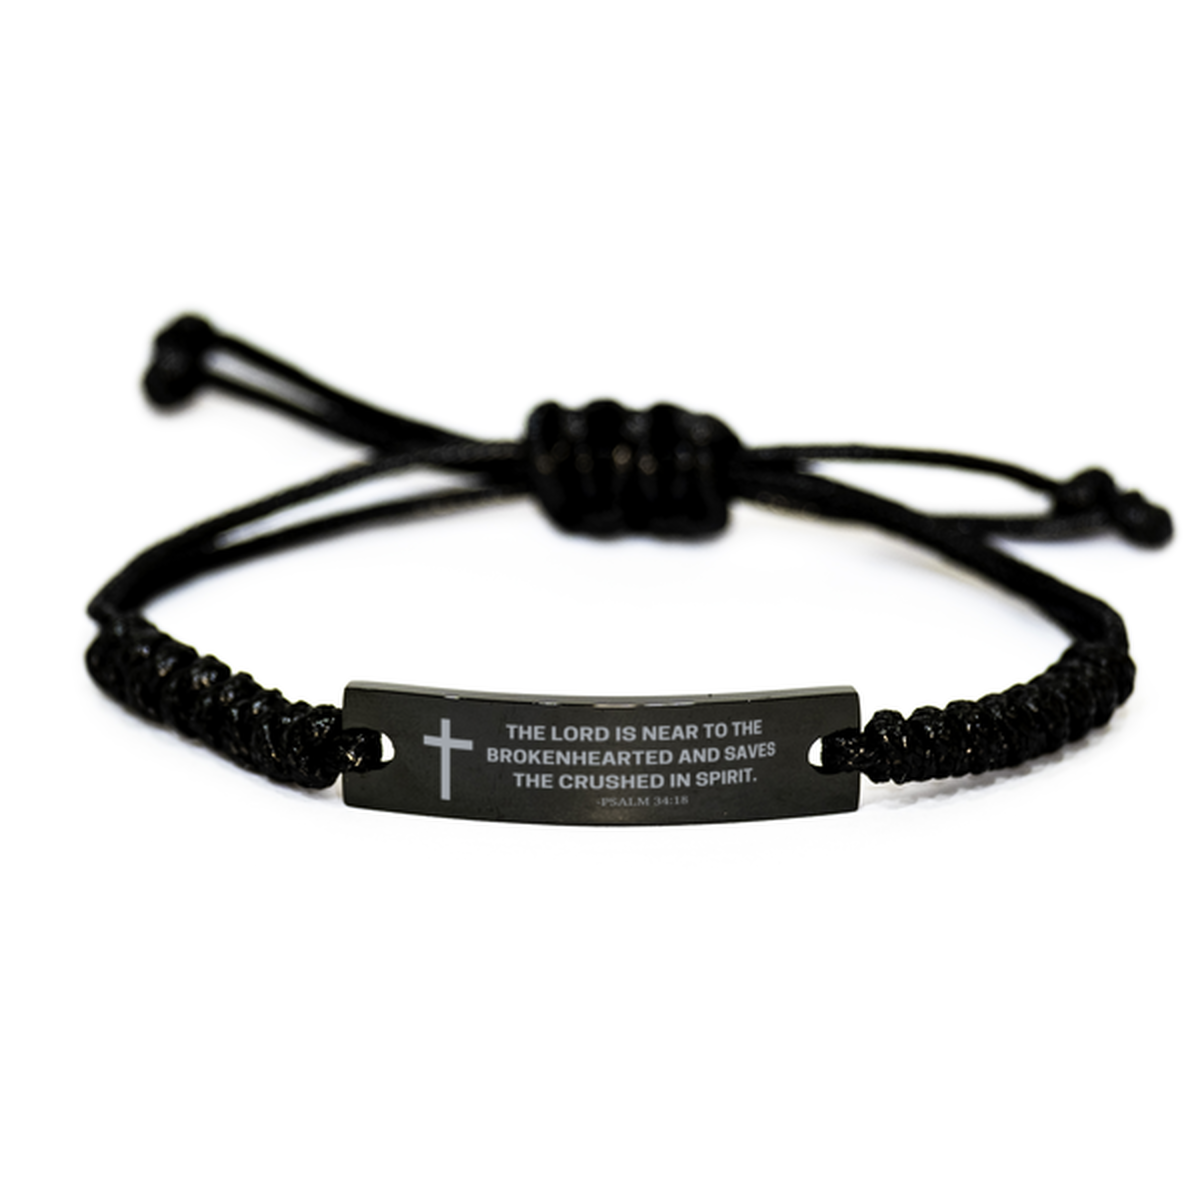 Baptism Gifts For Teenage Boys Girls, Christian Bible Verse Black Rope Bracelet, The Lord is near to the brokenhearted, Catholic Confirmation Gifts for Son, Godson, Grandson, Nephew